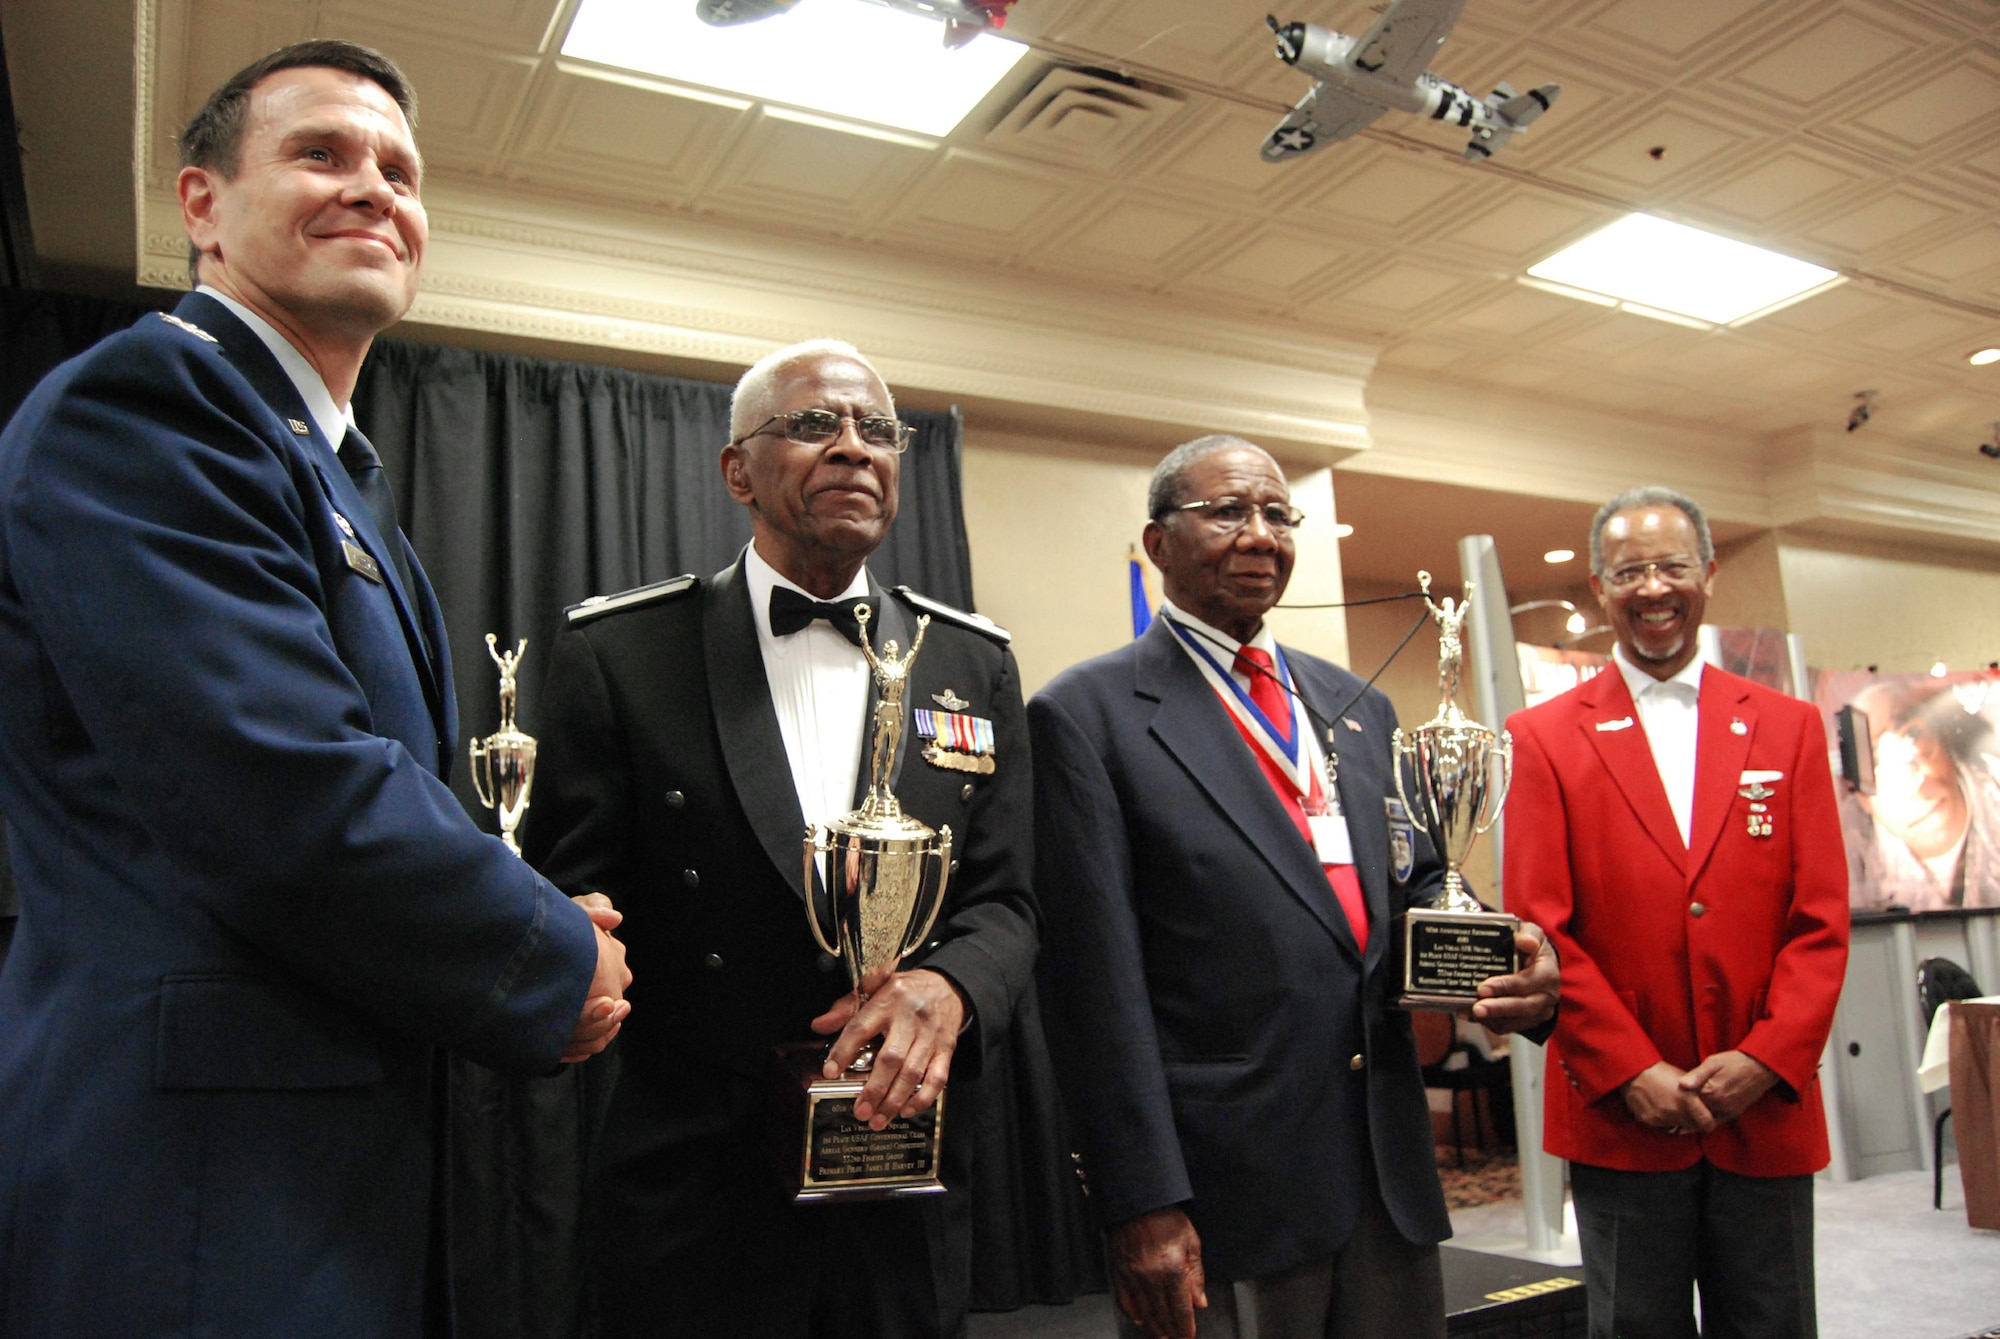 Col. John Montgomery (left) pauses for a photo with retired Lt. Col. James Harvey, retired Chief Master Sgt. Buford Johnson and Tuskegee Airmen Inc. President Russell Davis during the 60th anniversary recognition ceremony of the "Gunsmoke" competition for sharp shooters Aug. 6 at the Palace Station Hotel in Las Vegas. The event occurred during the 38th annual TAI National Convention Aug. 6 through 9. Colonel Montgomery is the Range Wing commander at Nellis Air Force Base, Nev. (U.S. Air Force photo/Tech. Sgt. Amaani Lyle)